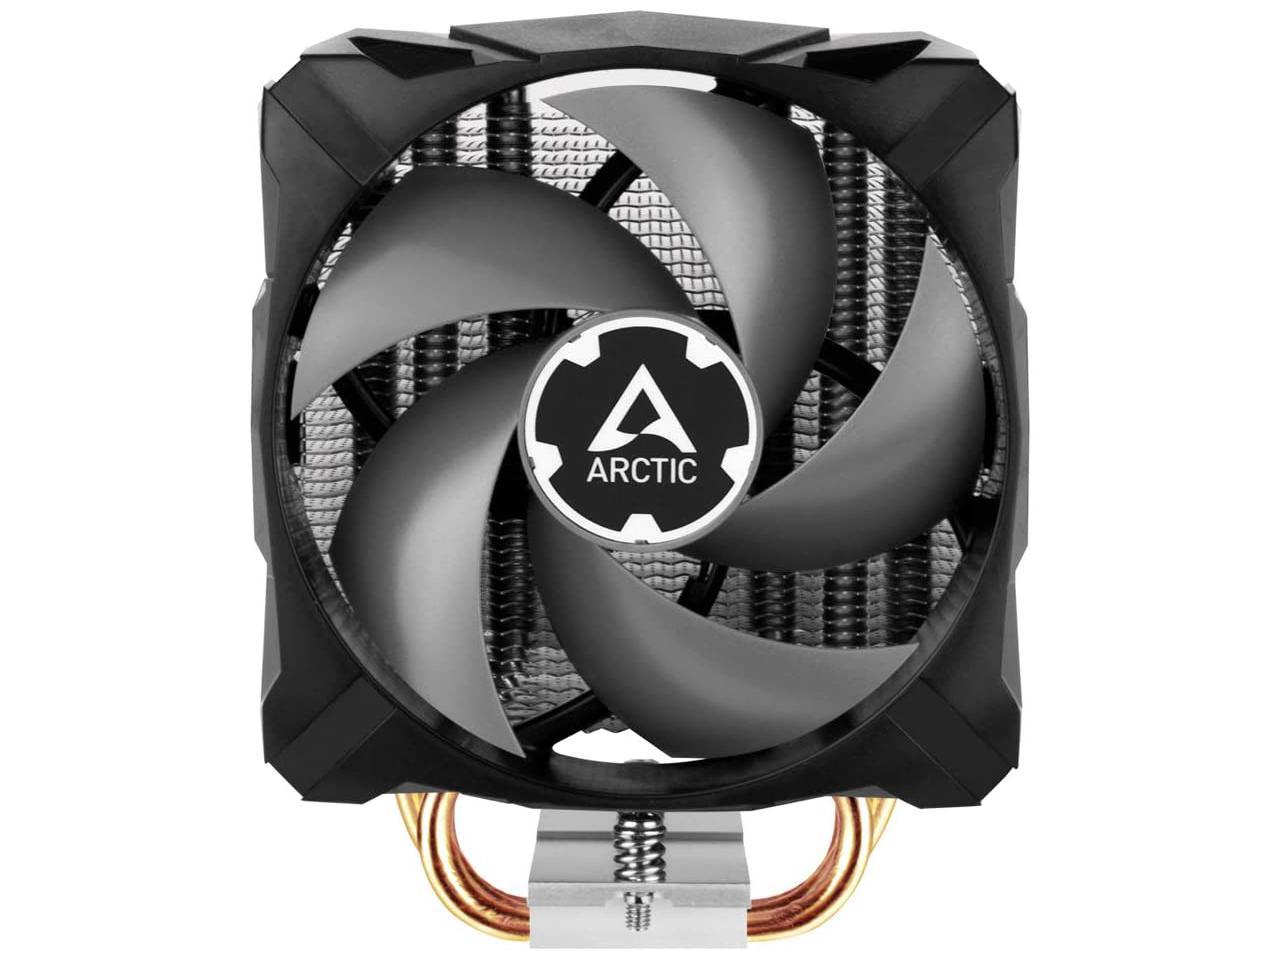 ARCTIC Freezer i13 X CO - Compact Intel CPU Cooler, 100 mm, 300-2000 RPM (Controlled by PWM), Fluid Dynamic Bearing, Pre-Applied MX-2 Thermal Paste - Black